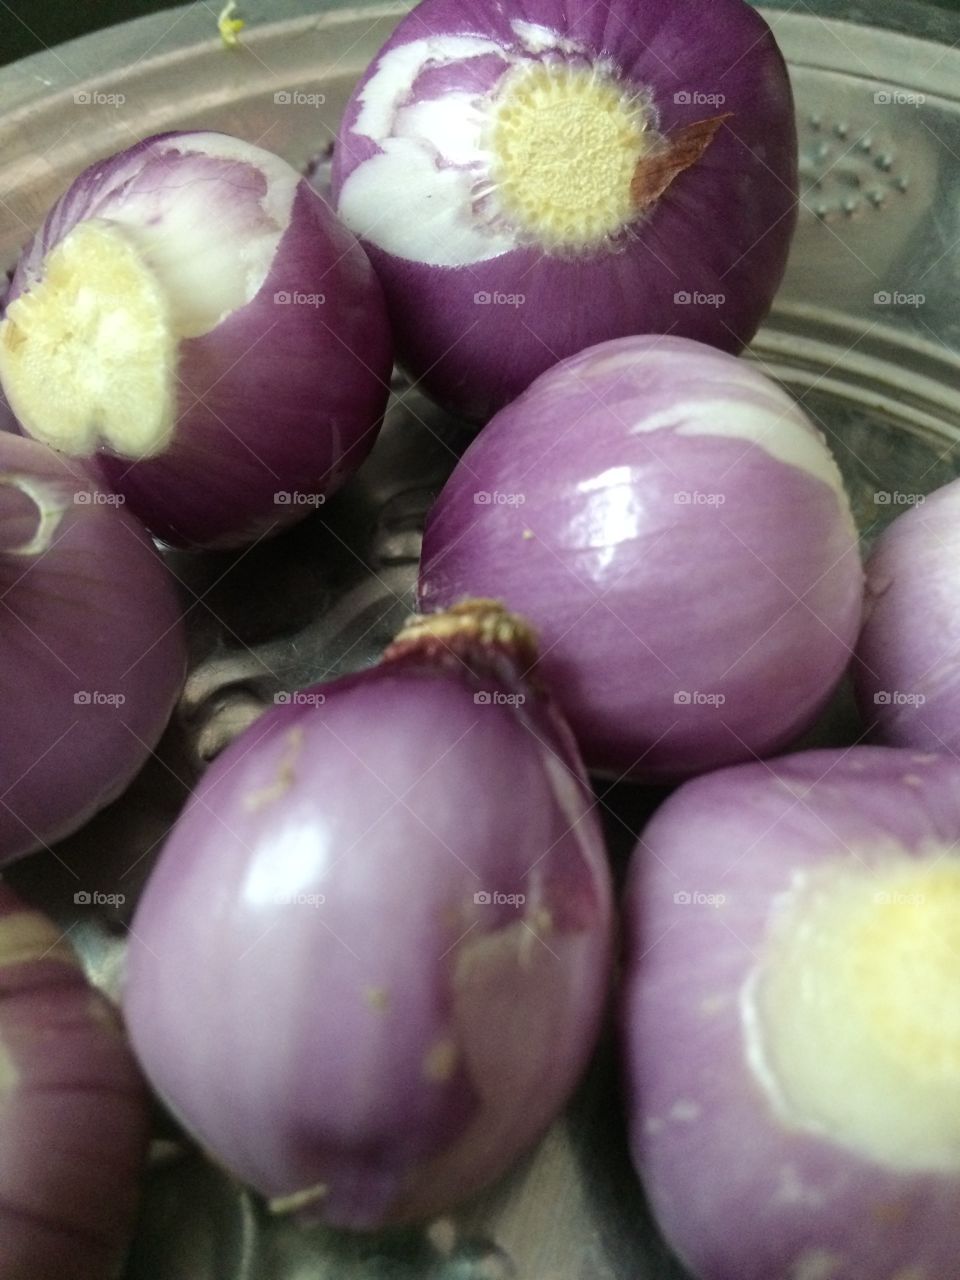 Elevated view of onions on plate